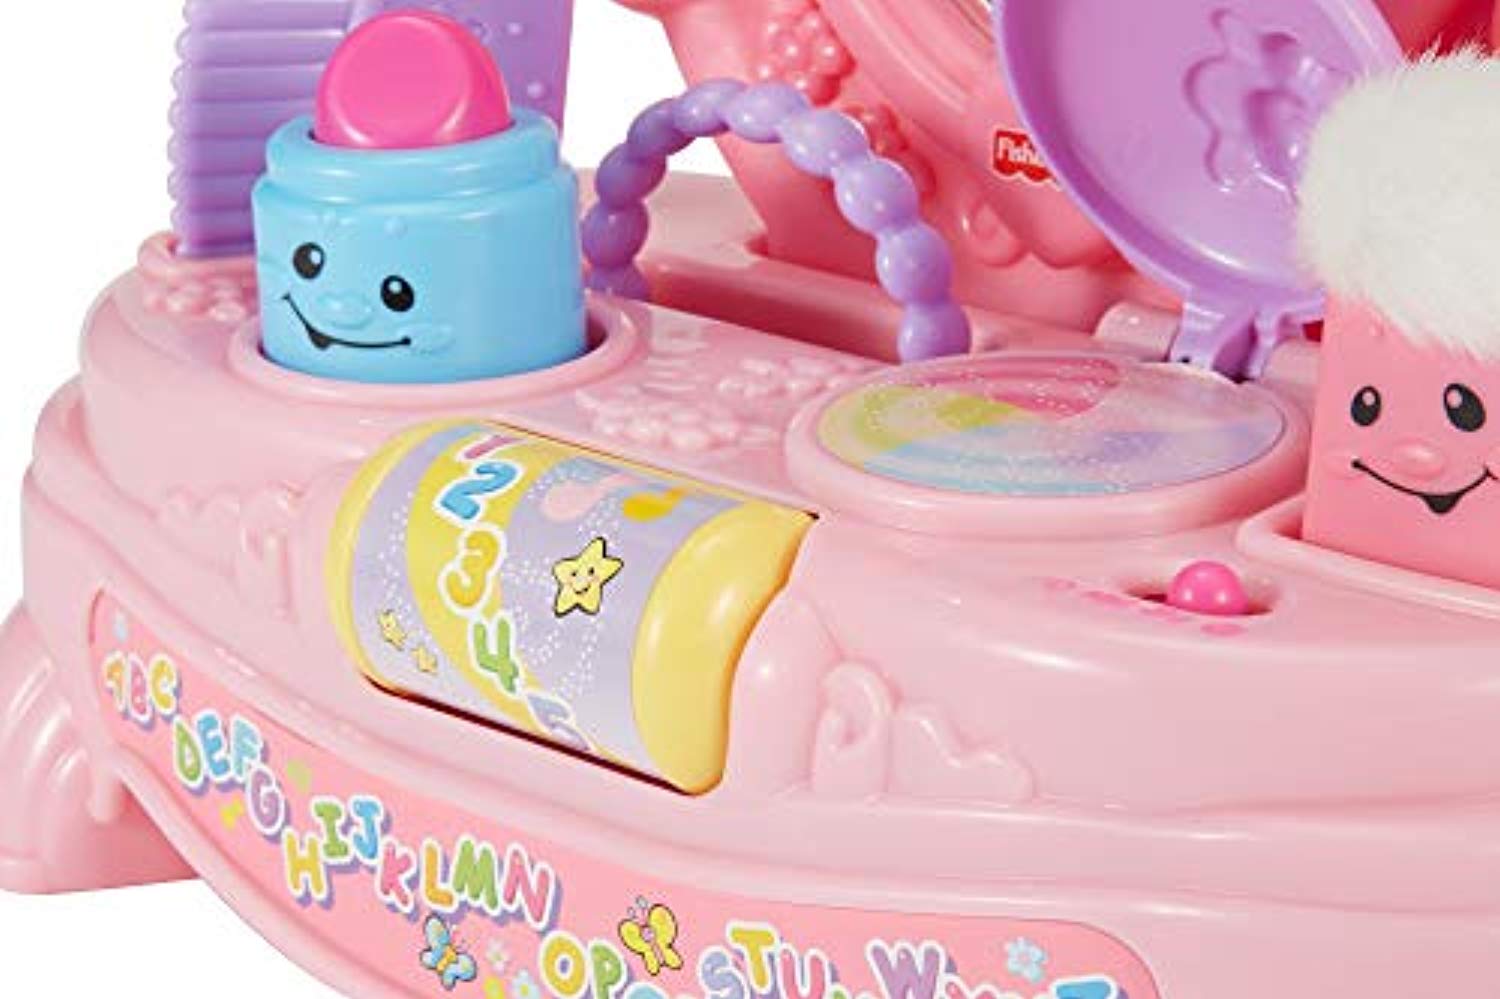 fisher price laugh and learn magical musical mirror